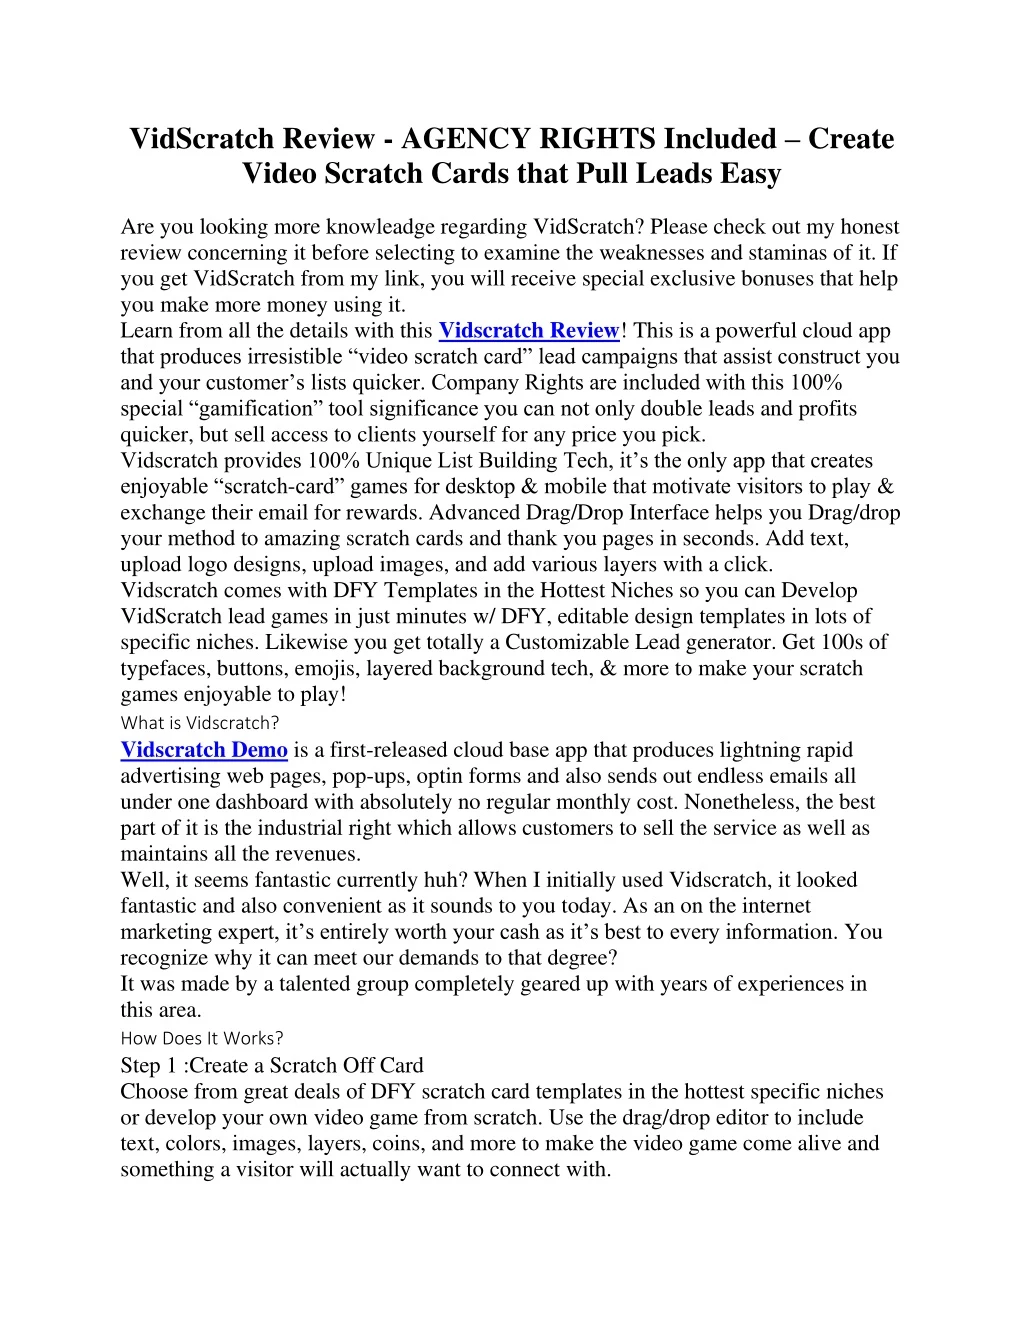 vidscratch review agency rights included create